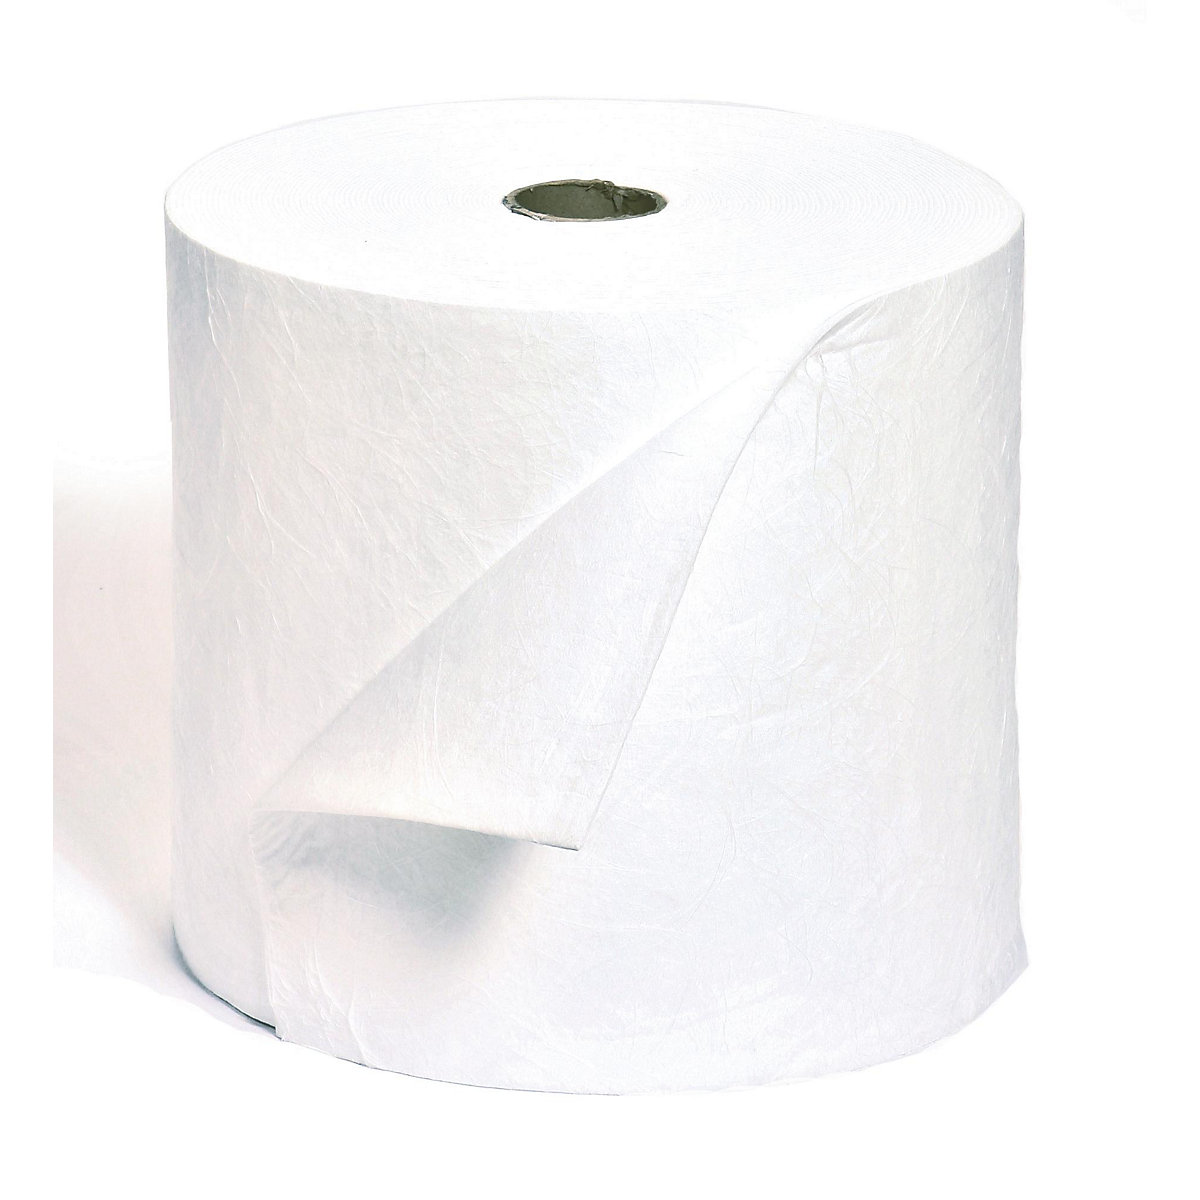 FIRST absorbent sheeting, roll of sheeting, heavy version, for oil, 400 mm x 40 m, white, pack of 2 rolls-12